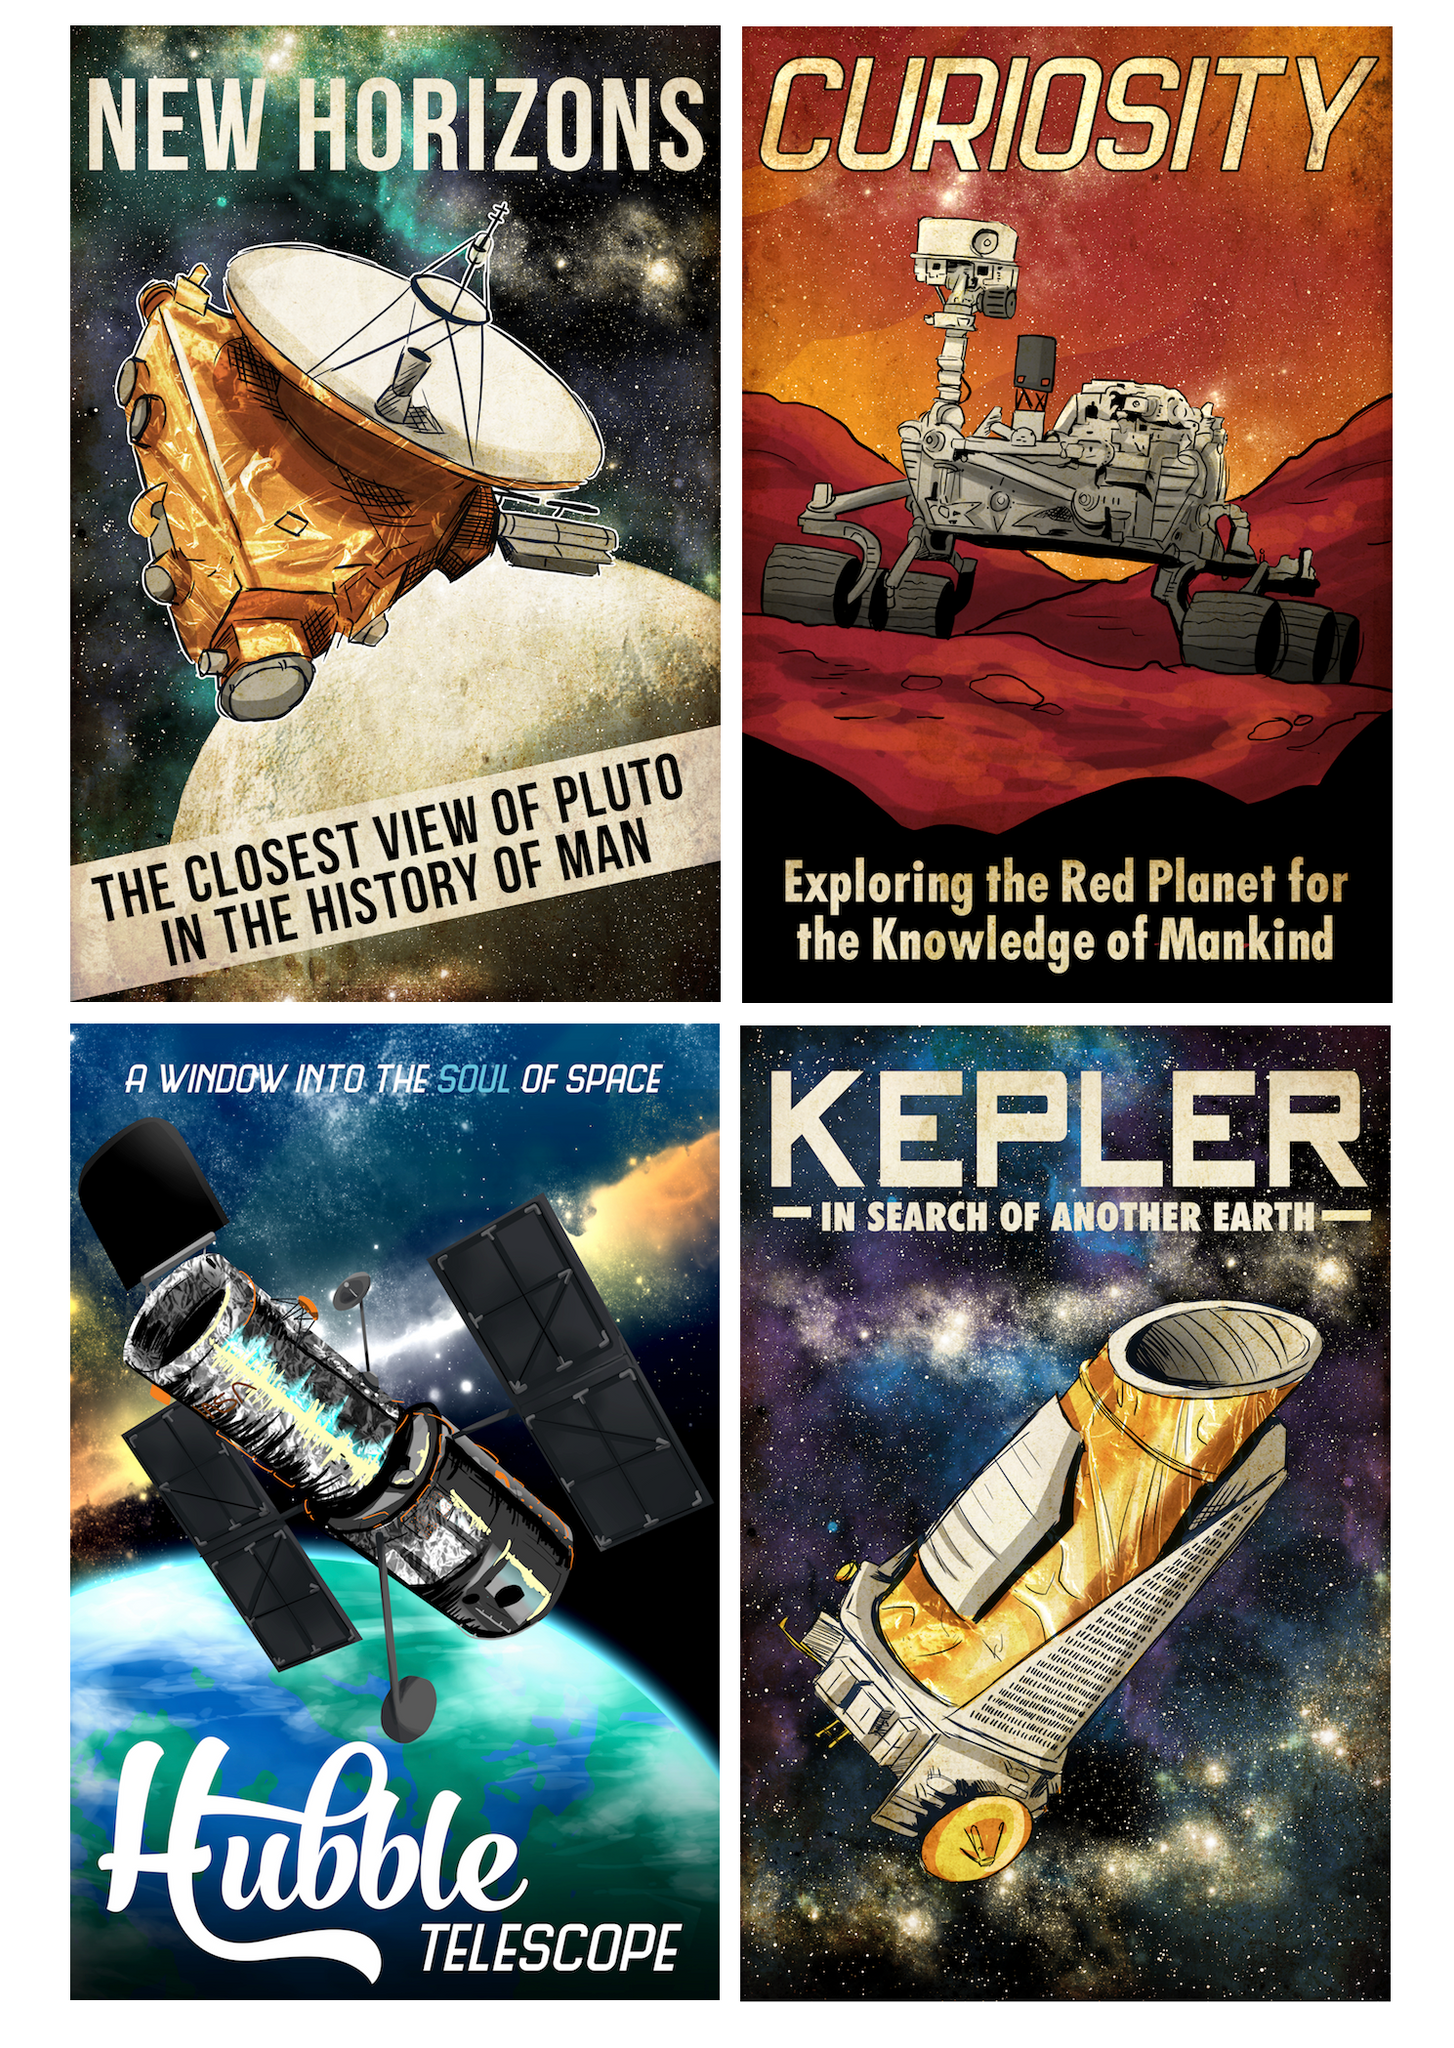 Space Expedition Series, Set of 4